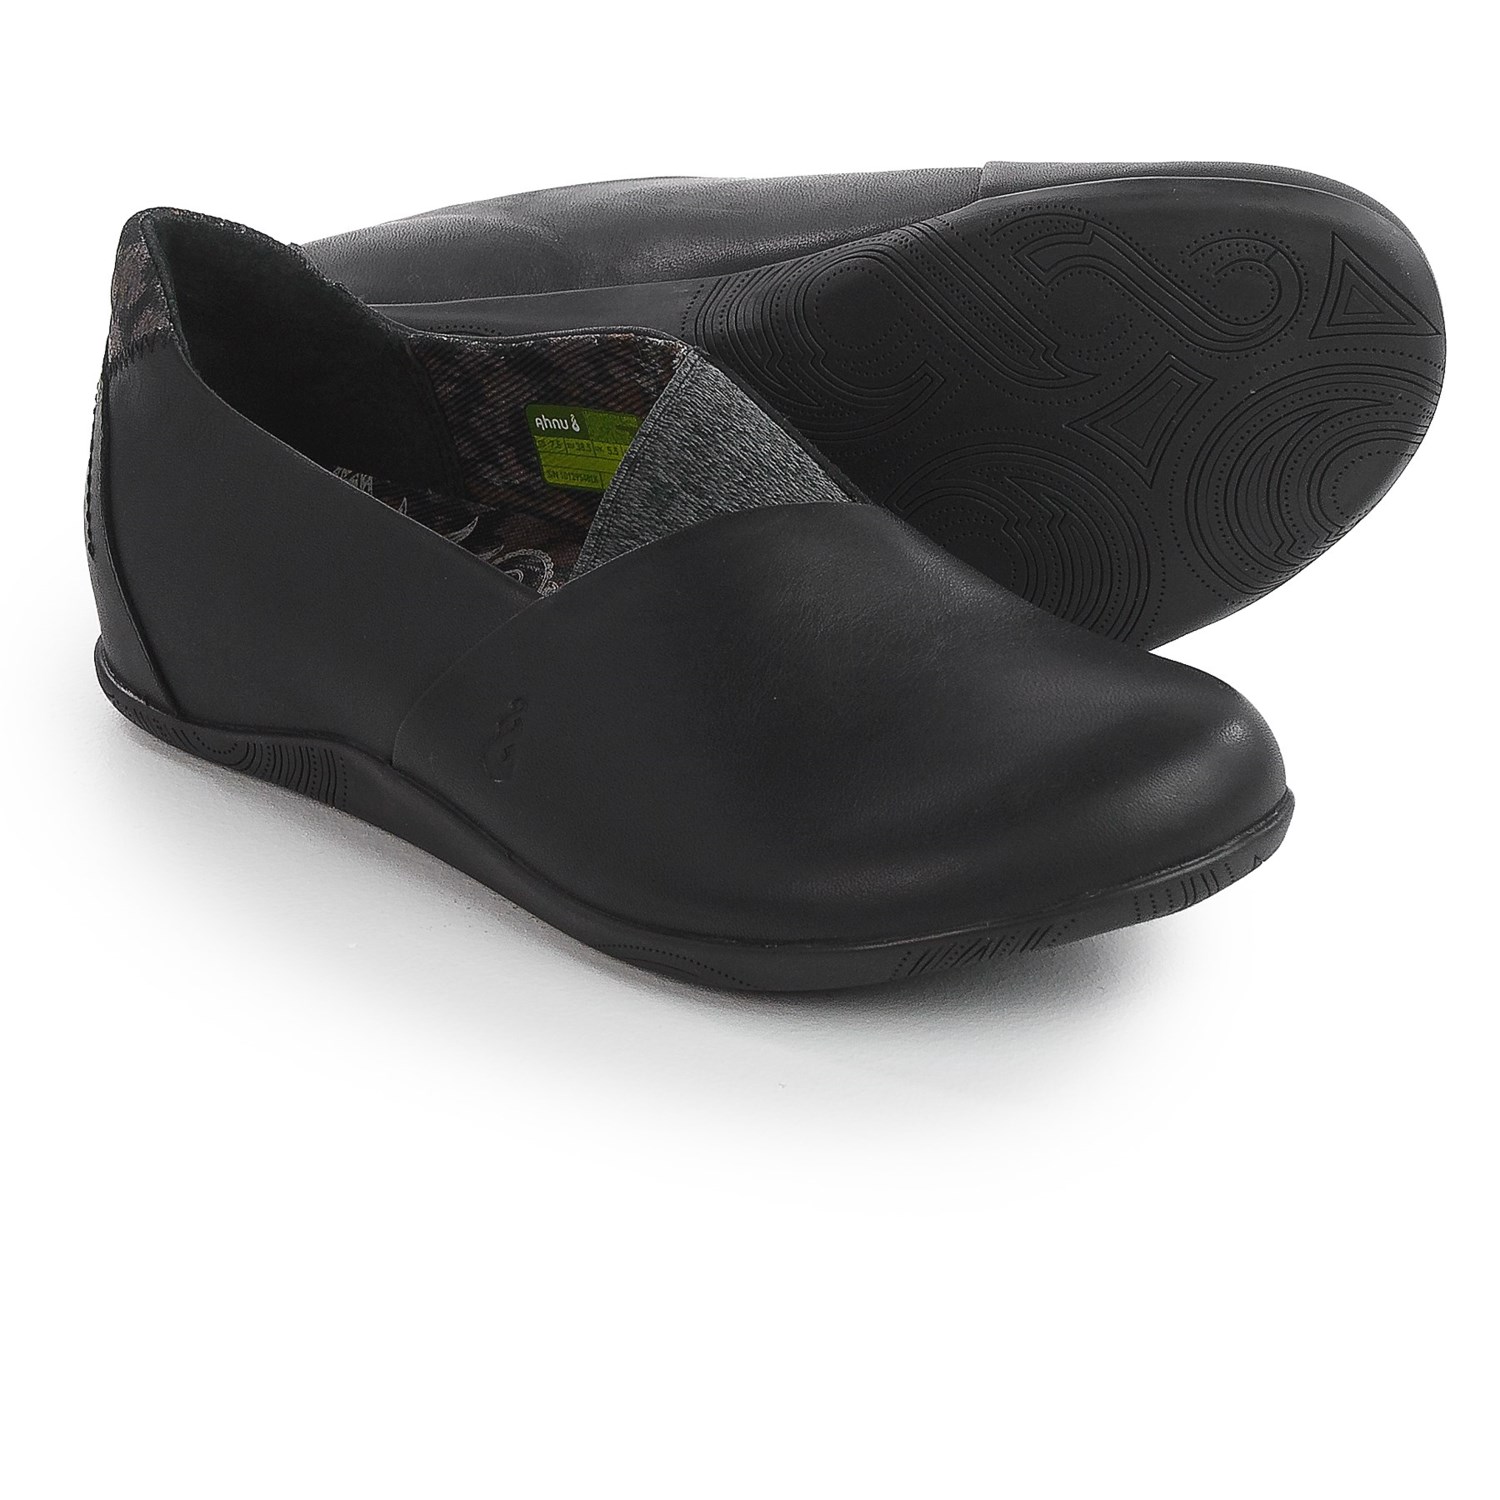 Ahnu Tola Shoes (For Women) - Save 63%